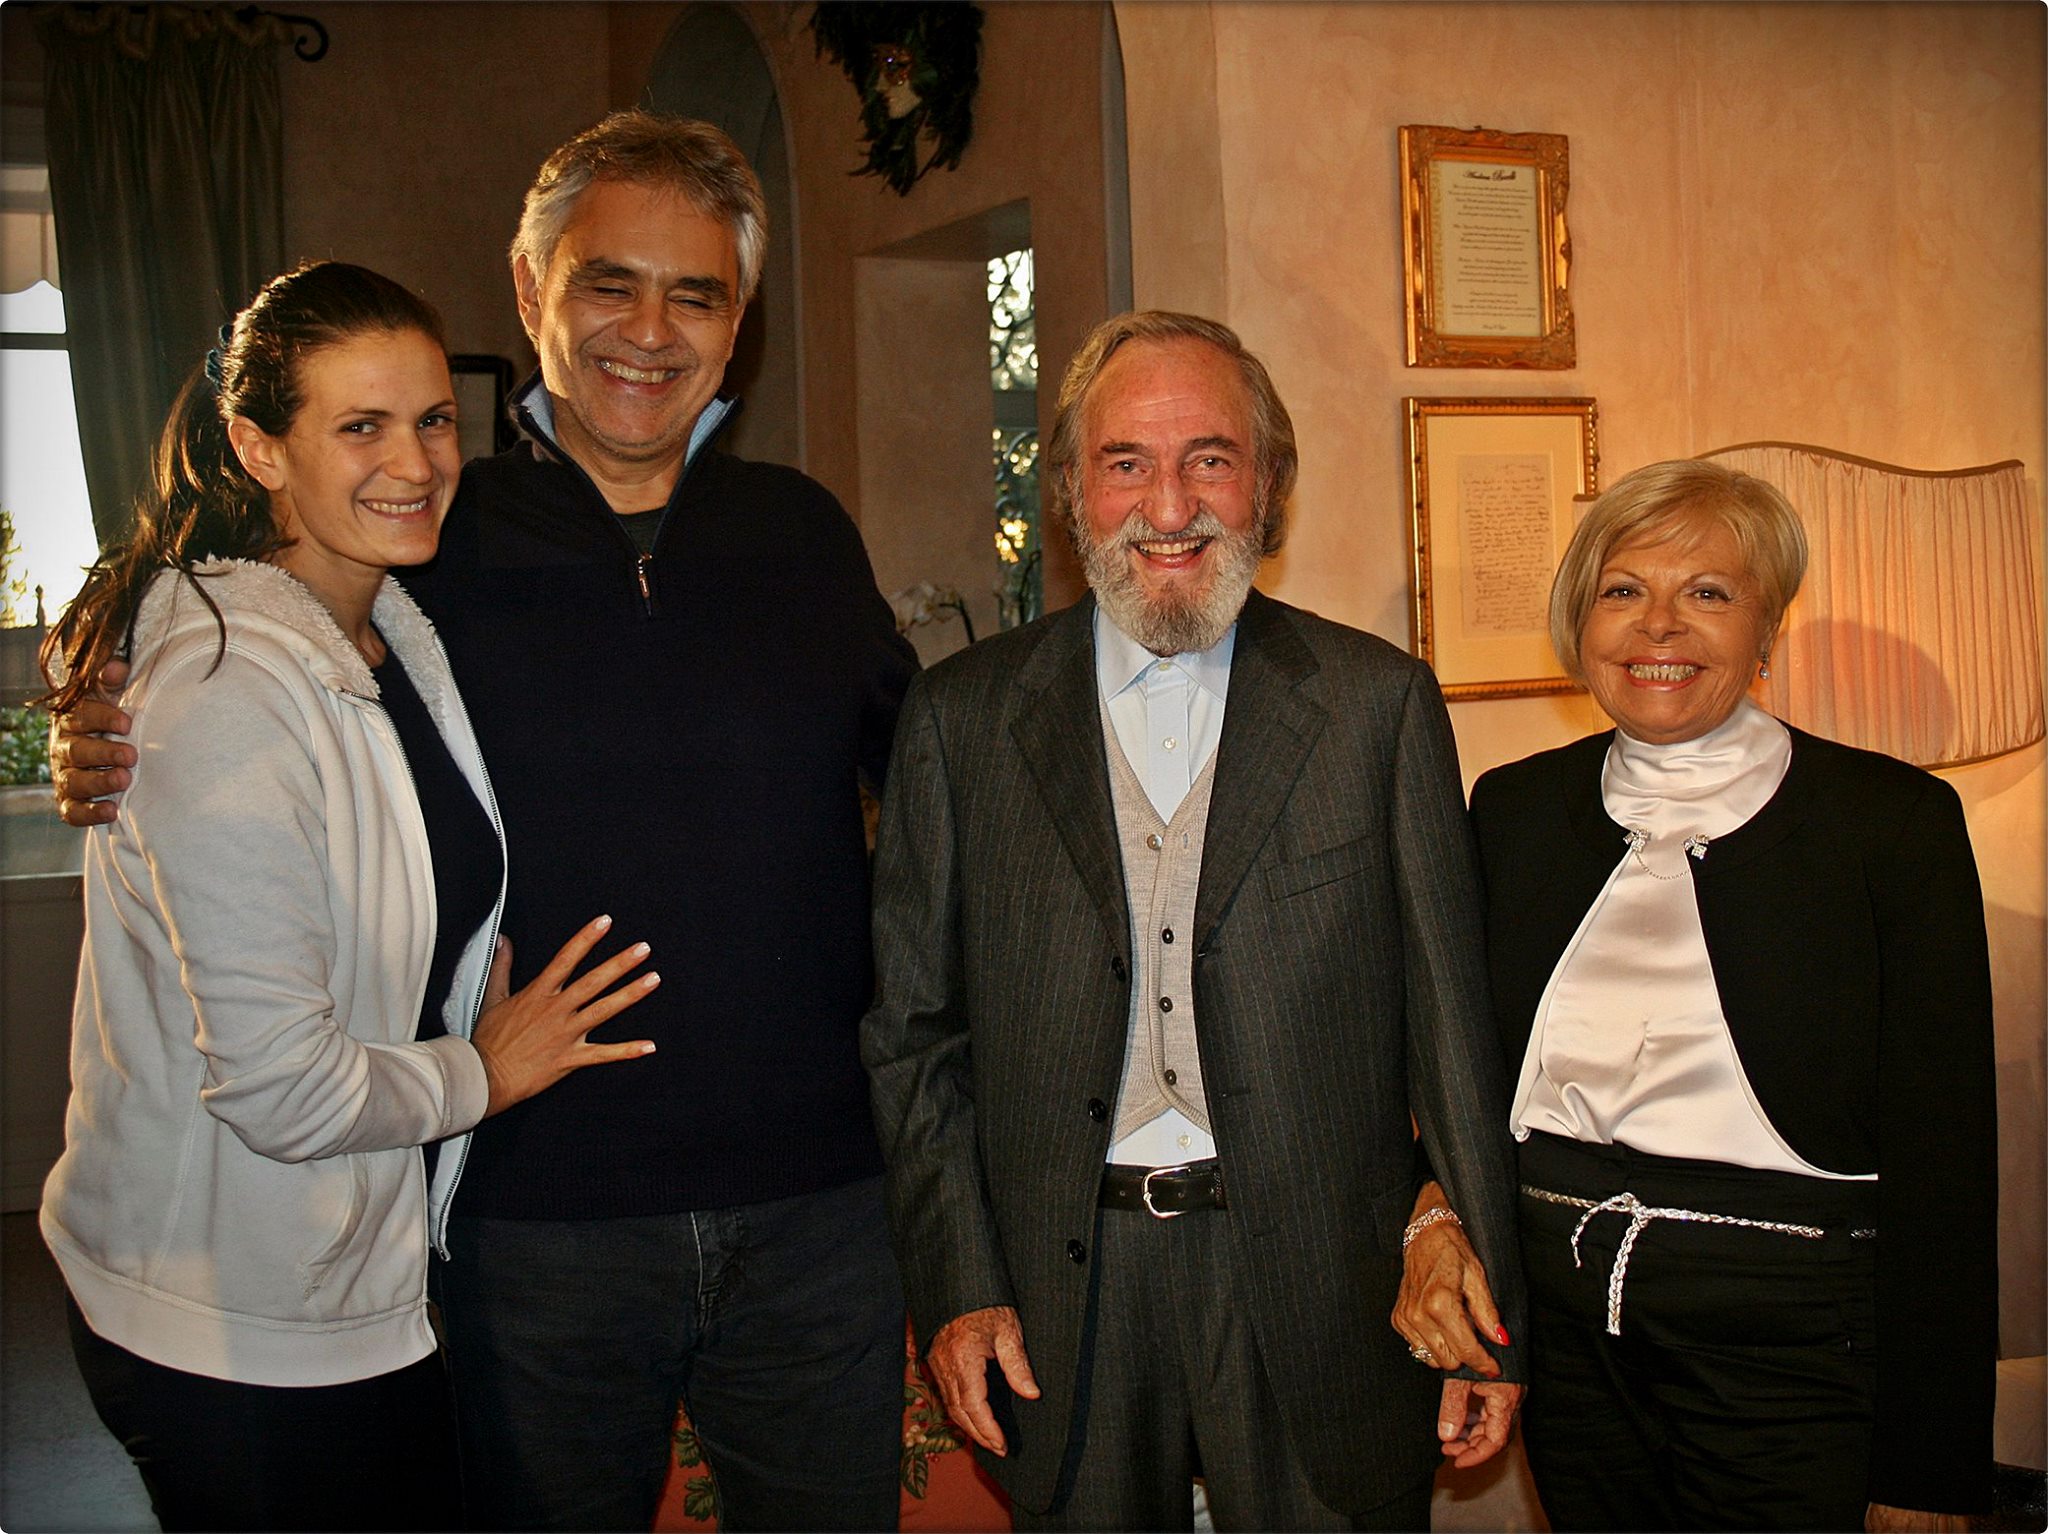 Andrea, Pier Franco and wives